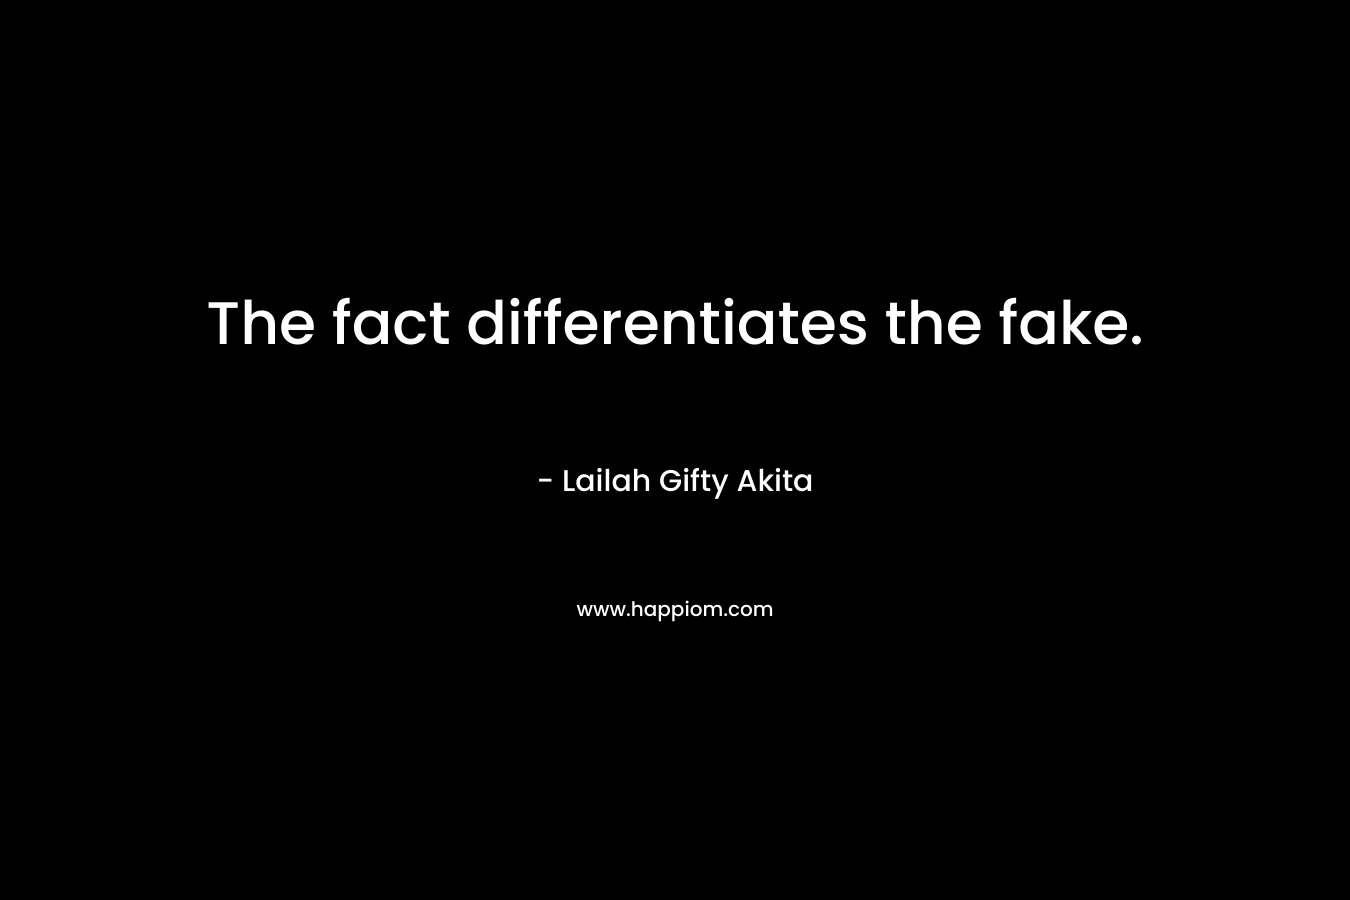 The fact differentiates the fake. – Lailah Gifty Akita